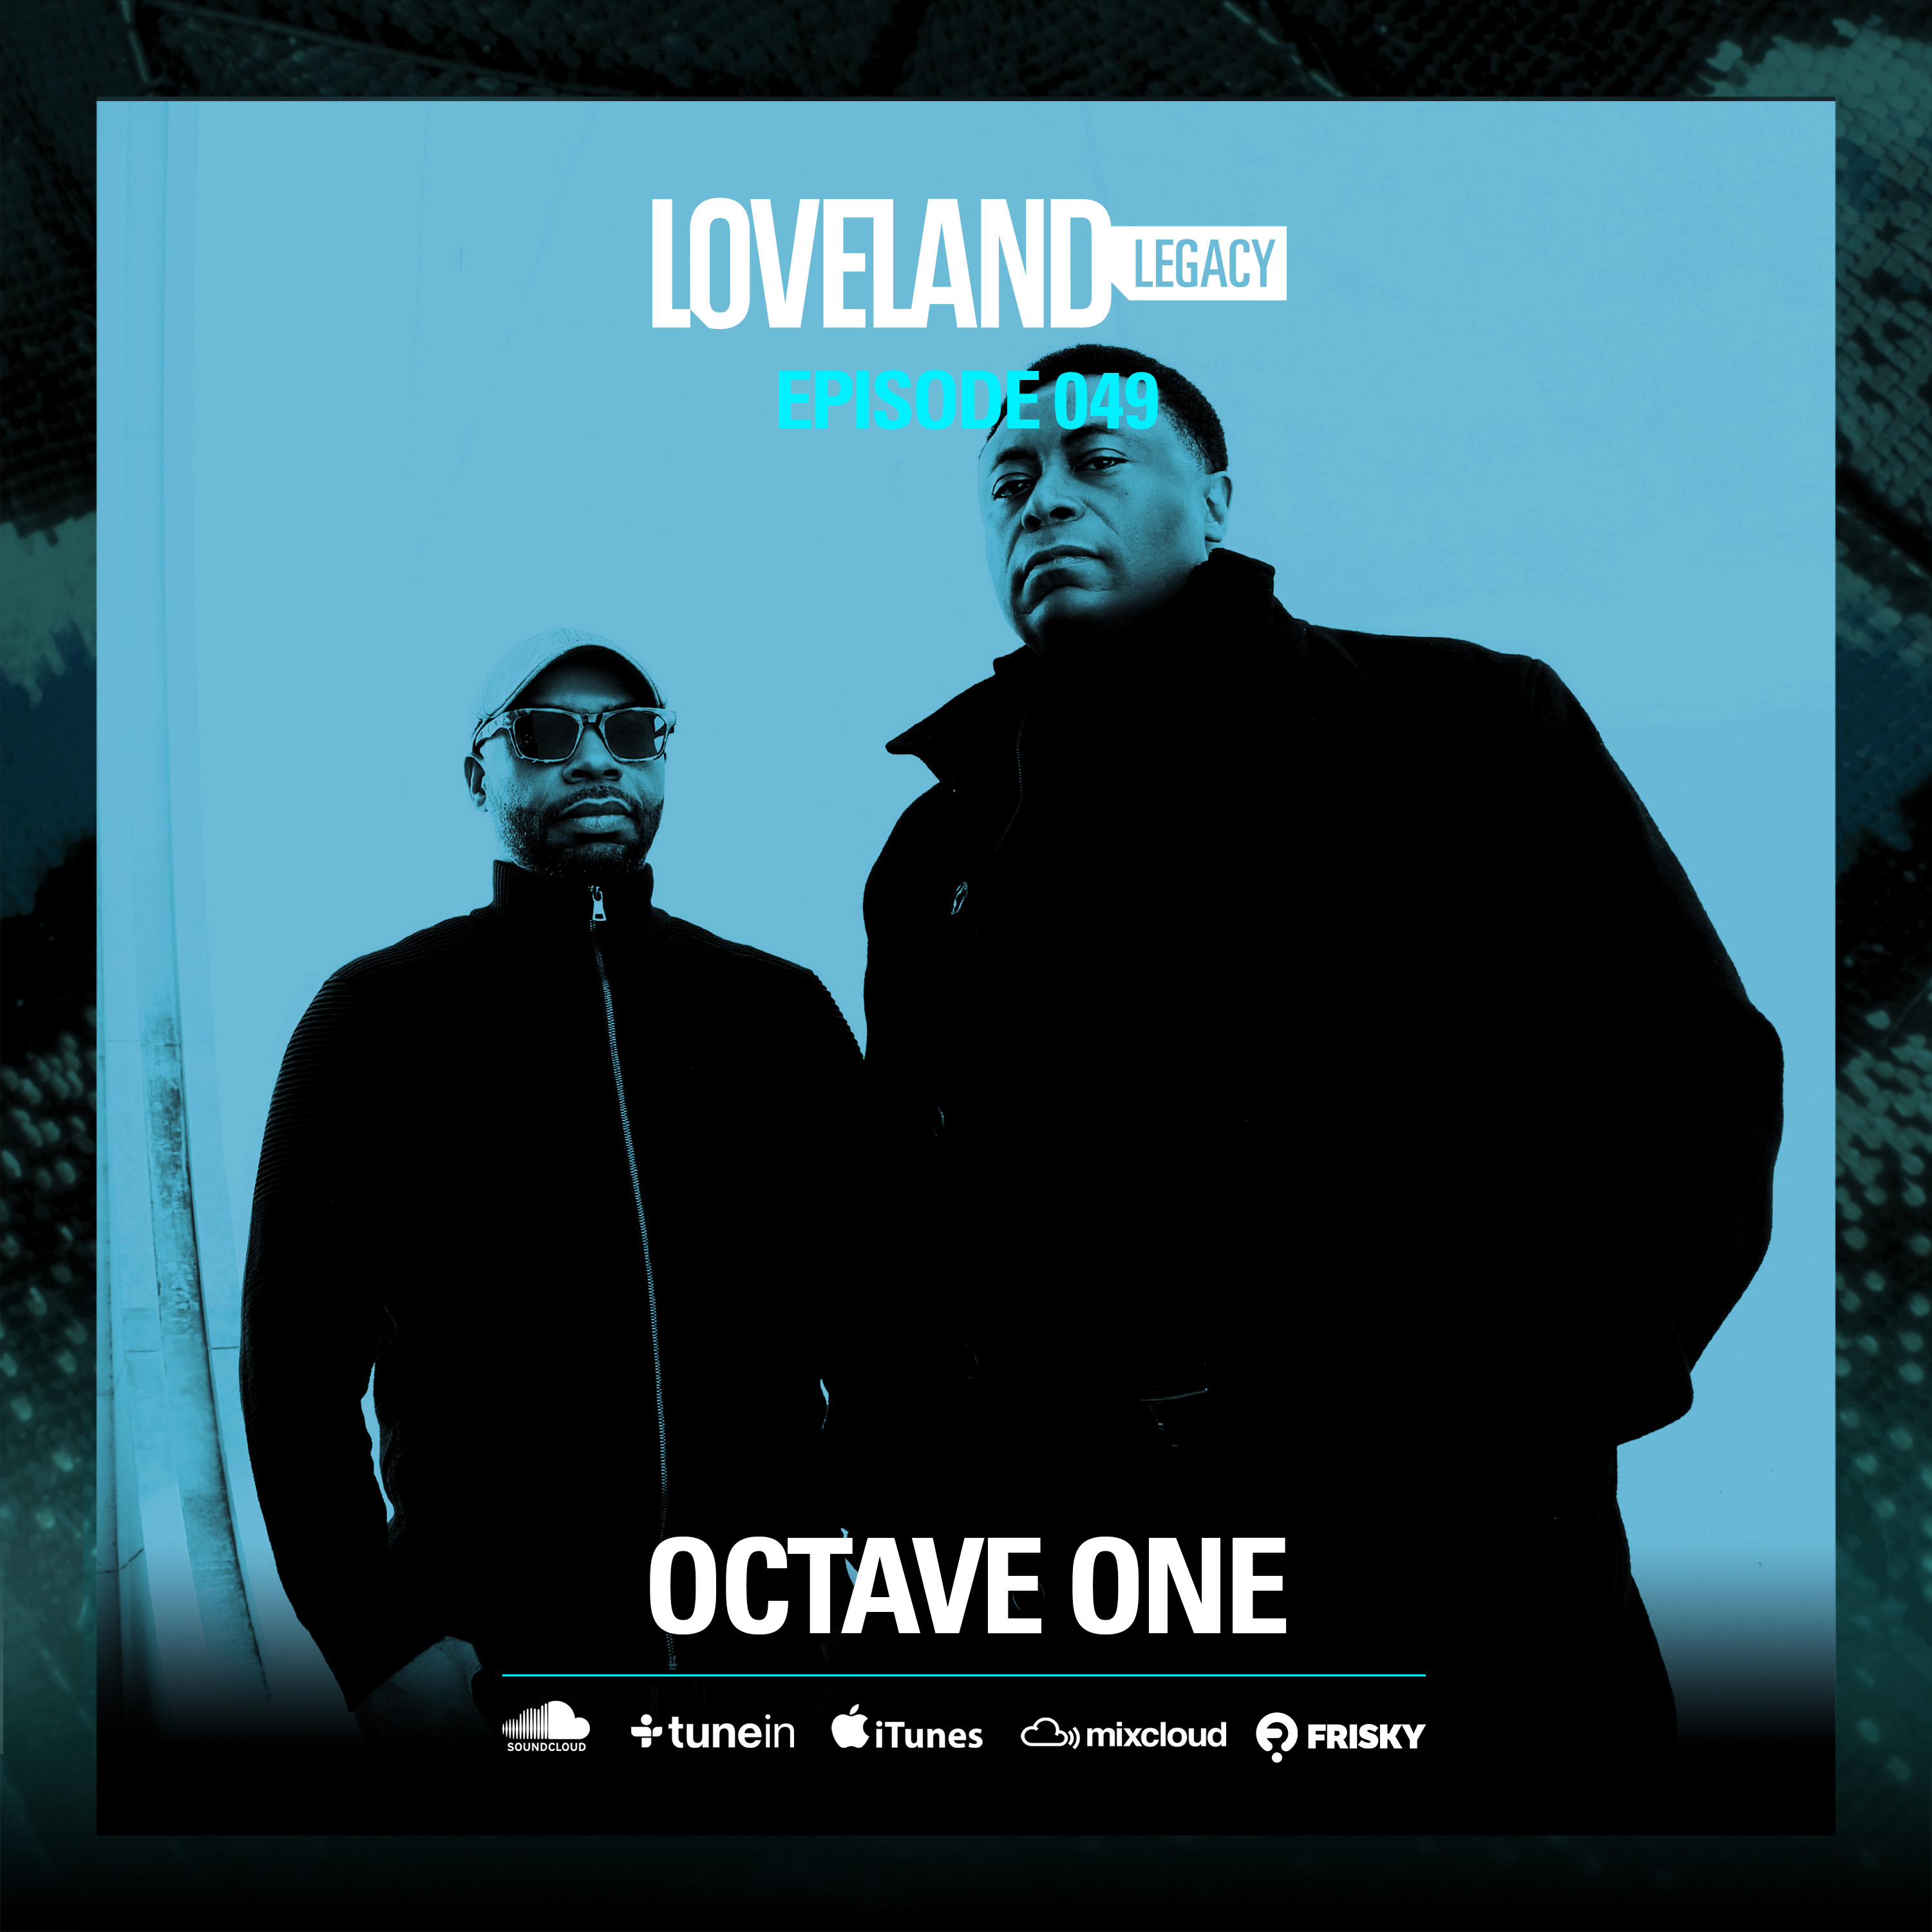 The Burden brothers a.k.a. Octave One brought their huge analogue setup to Loveland's 100% live act show in 2015 and will do so again on Jan 1st for the 2017 edition of Loveland Live. Enjoy their 2015 set of raw analogue bliss in Episode 49 of Loveland Legacy! See you at: 31/12 Loveland New Year 2016 | bit.ly/LovelandNewYear2016 01/01 Loveland Live 2017 | bit.ly/LovelandLive2017